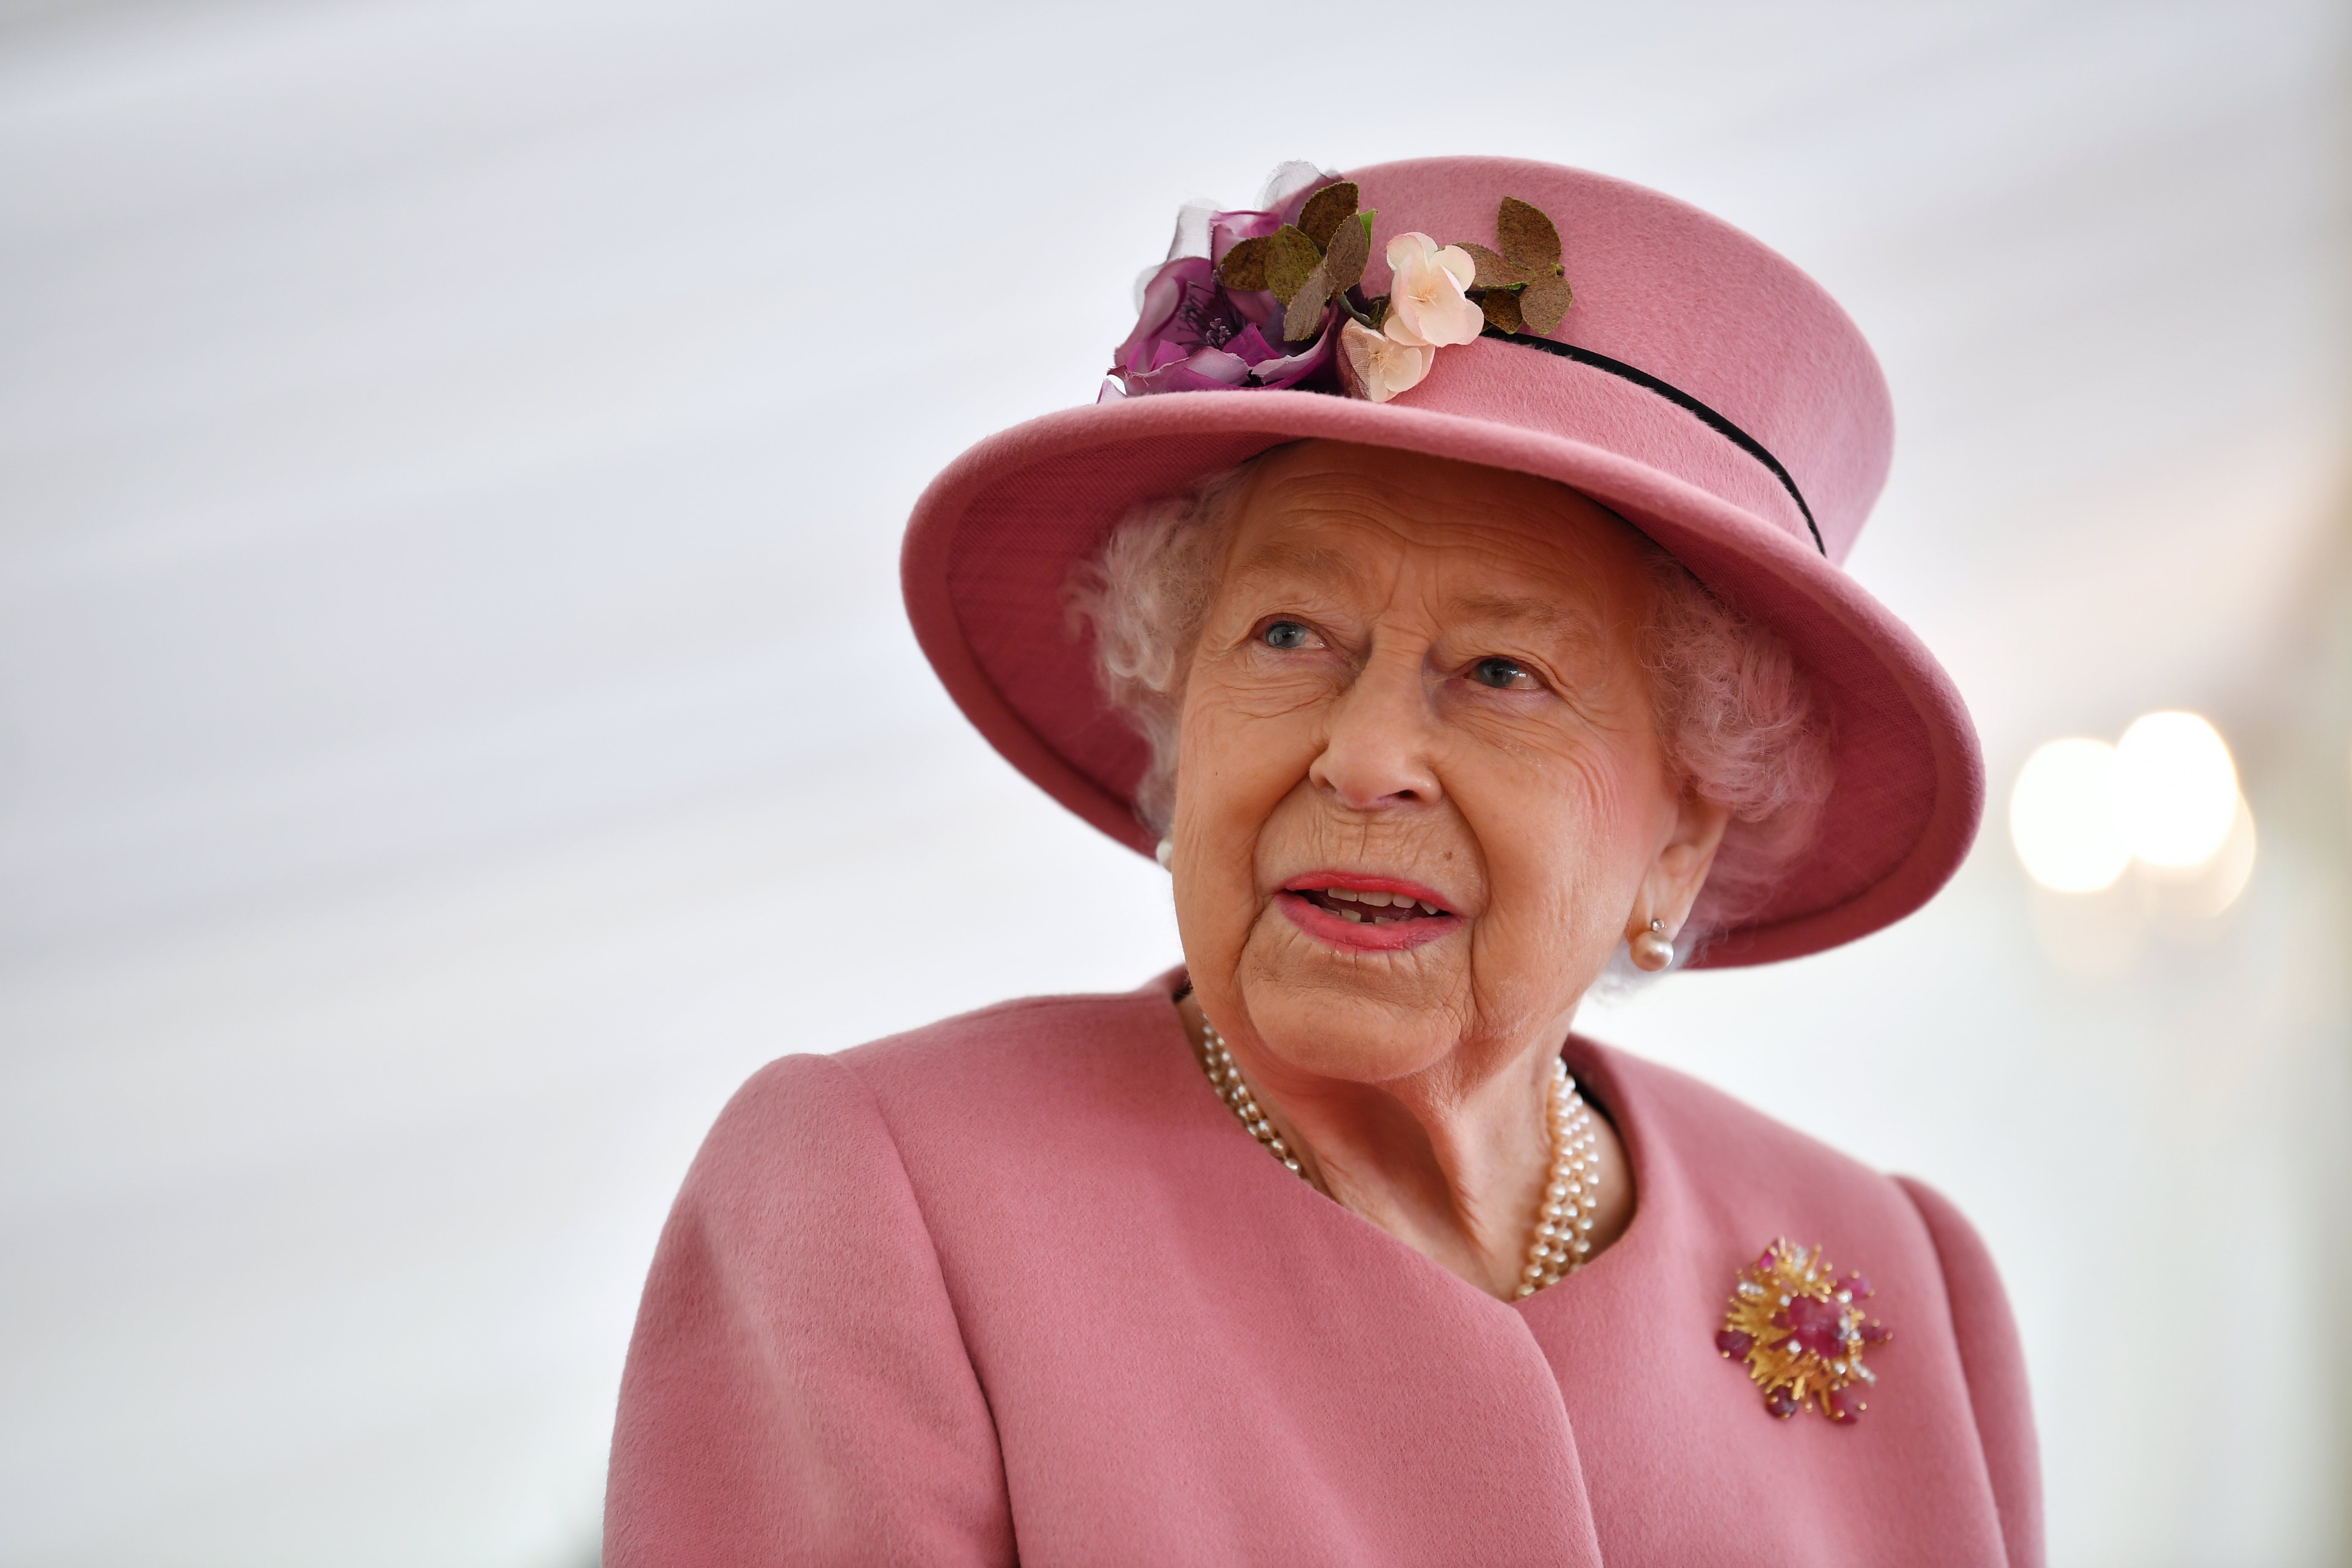 The palace announced on Sunday that the Queen had tested positive for coronavirus.